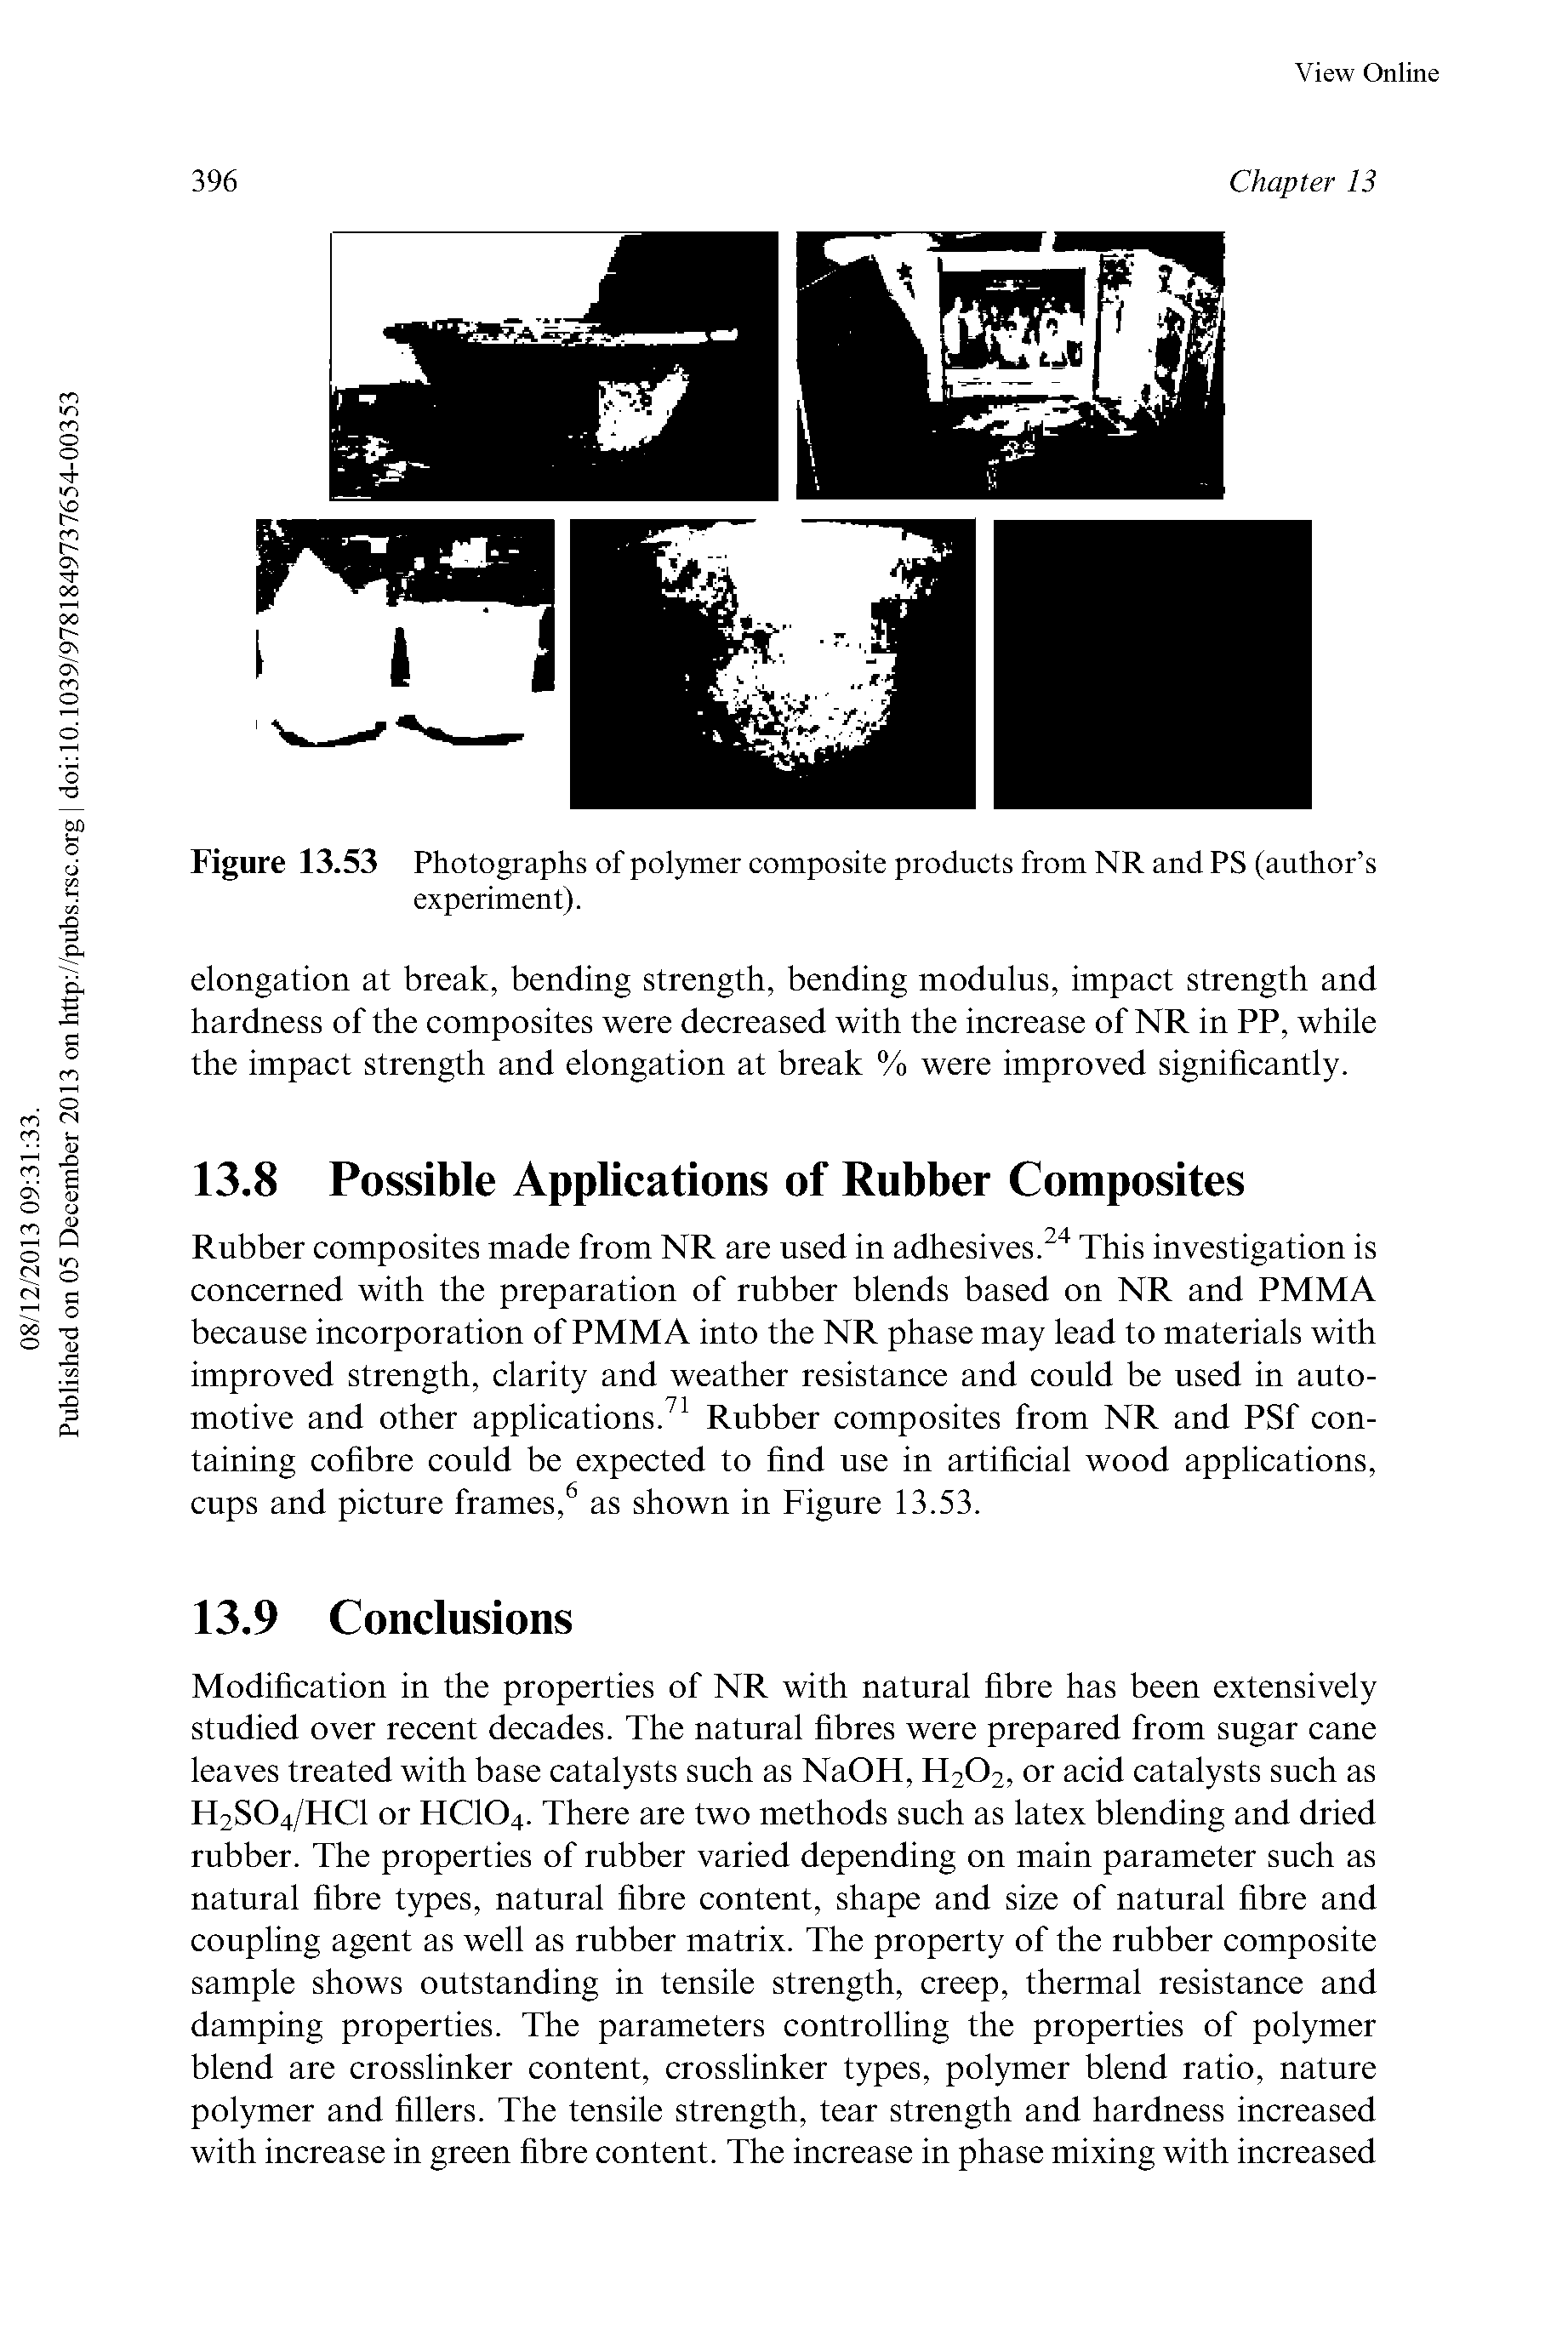 Figure 13.53 Photographs of polymer composite products from NR and PS (author s experiment).